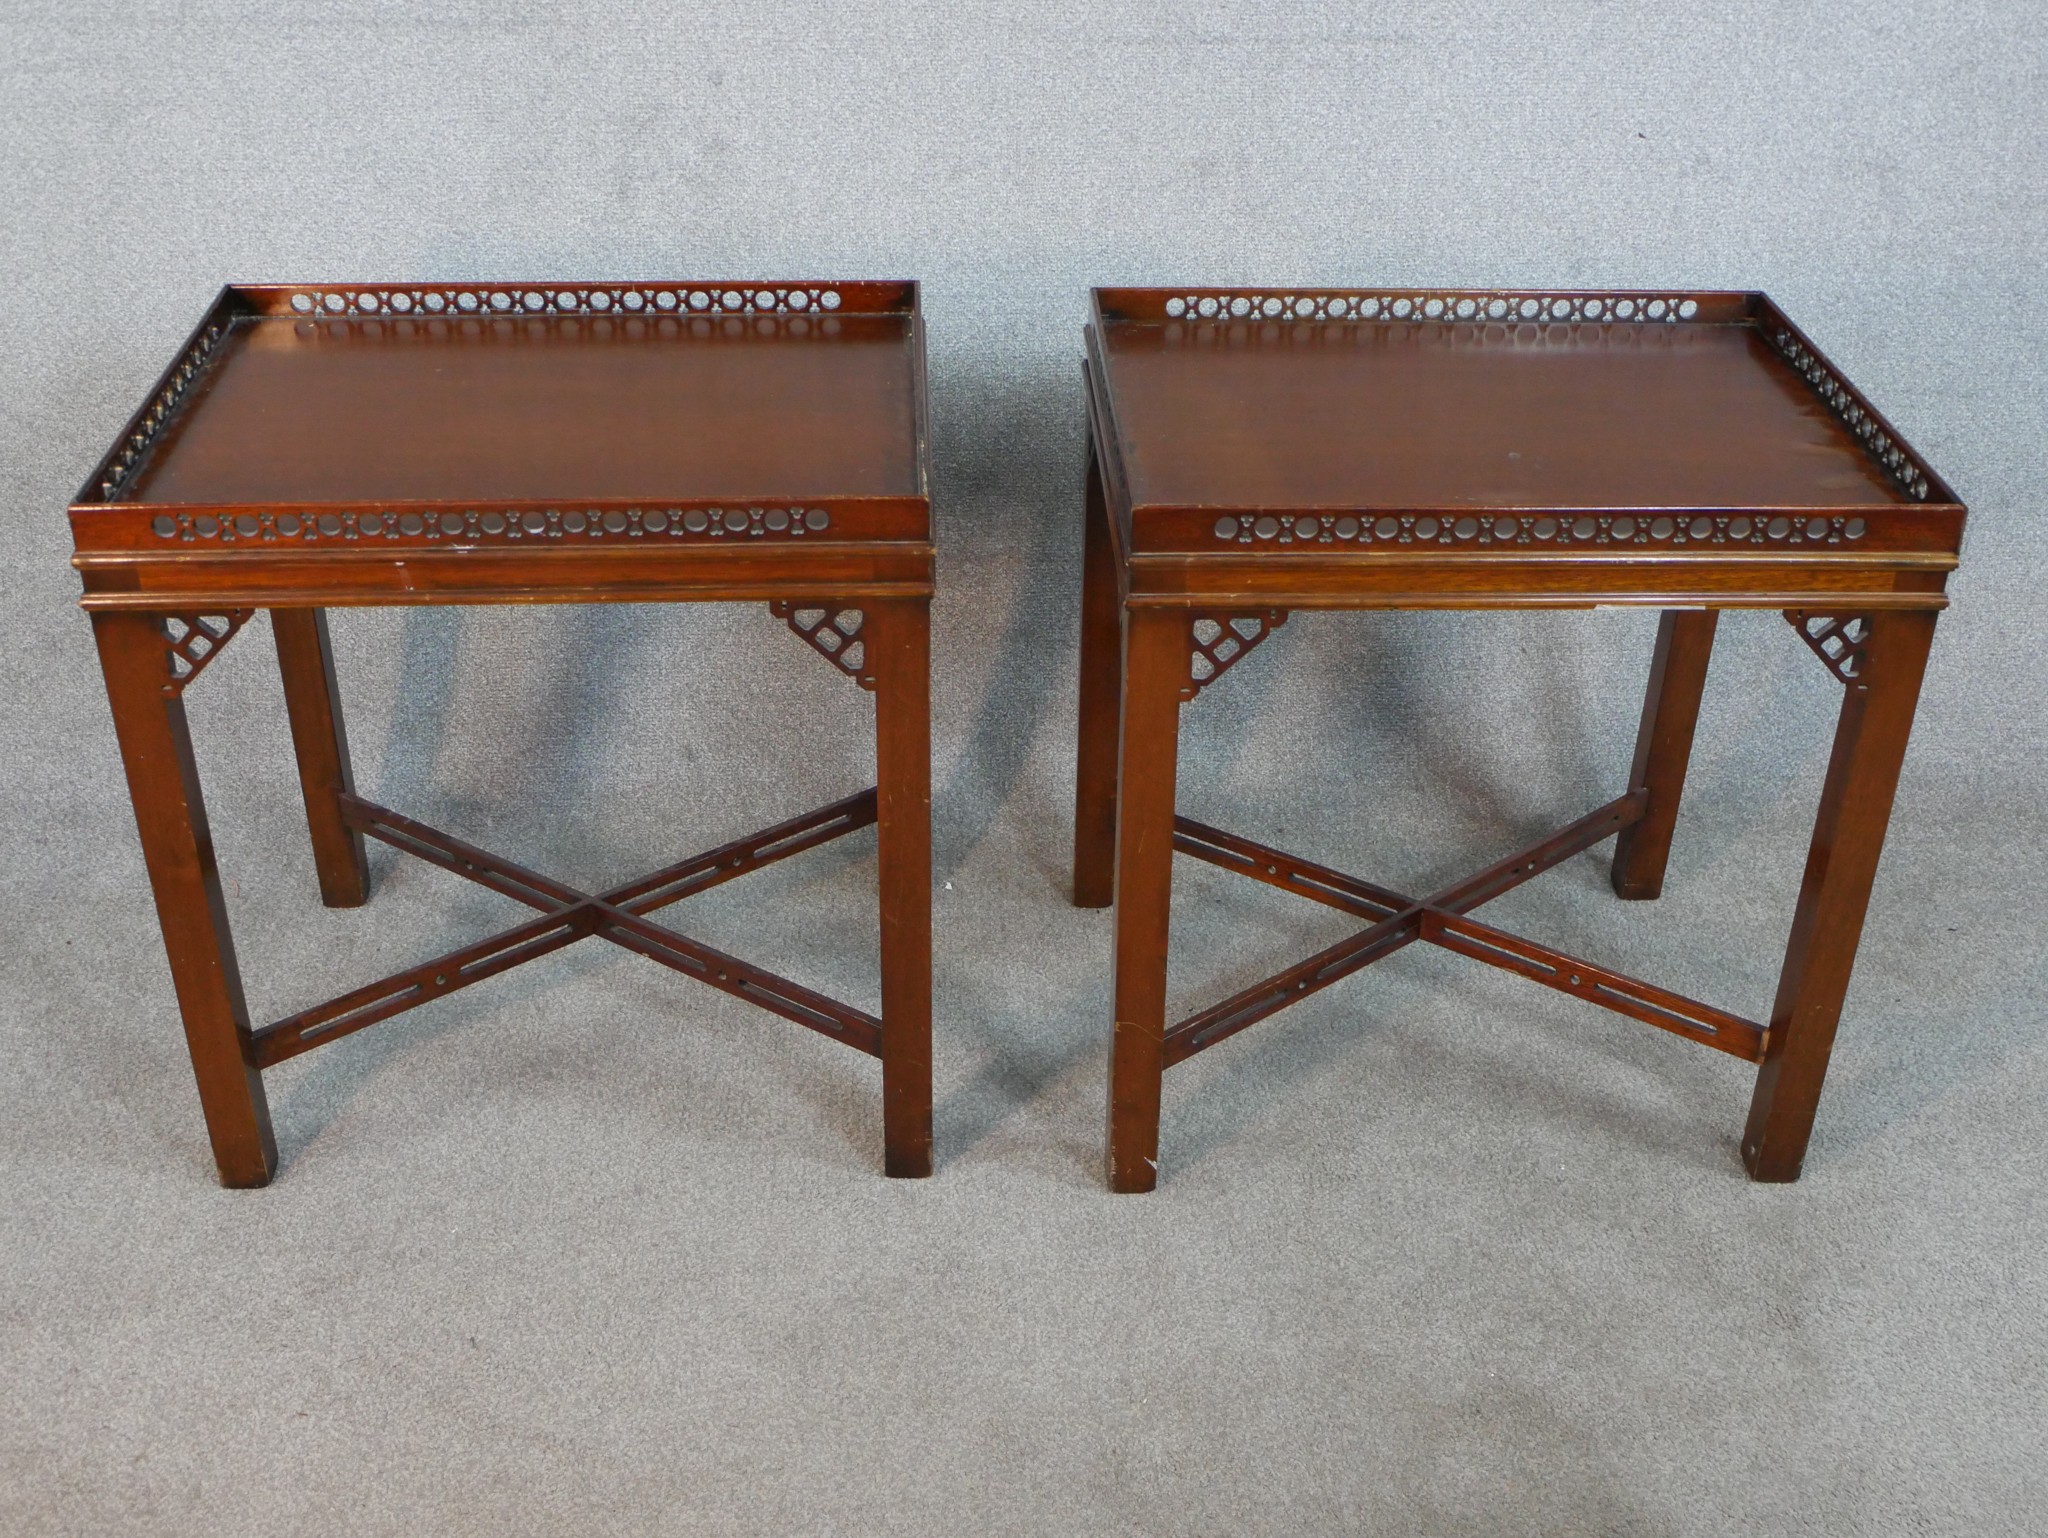 A pair of reporoduction mahogany lamp tables in Chippendale style, of rectangular form with a